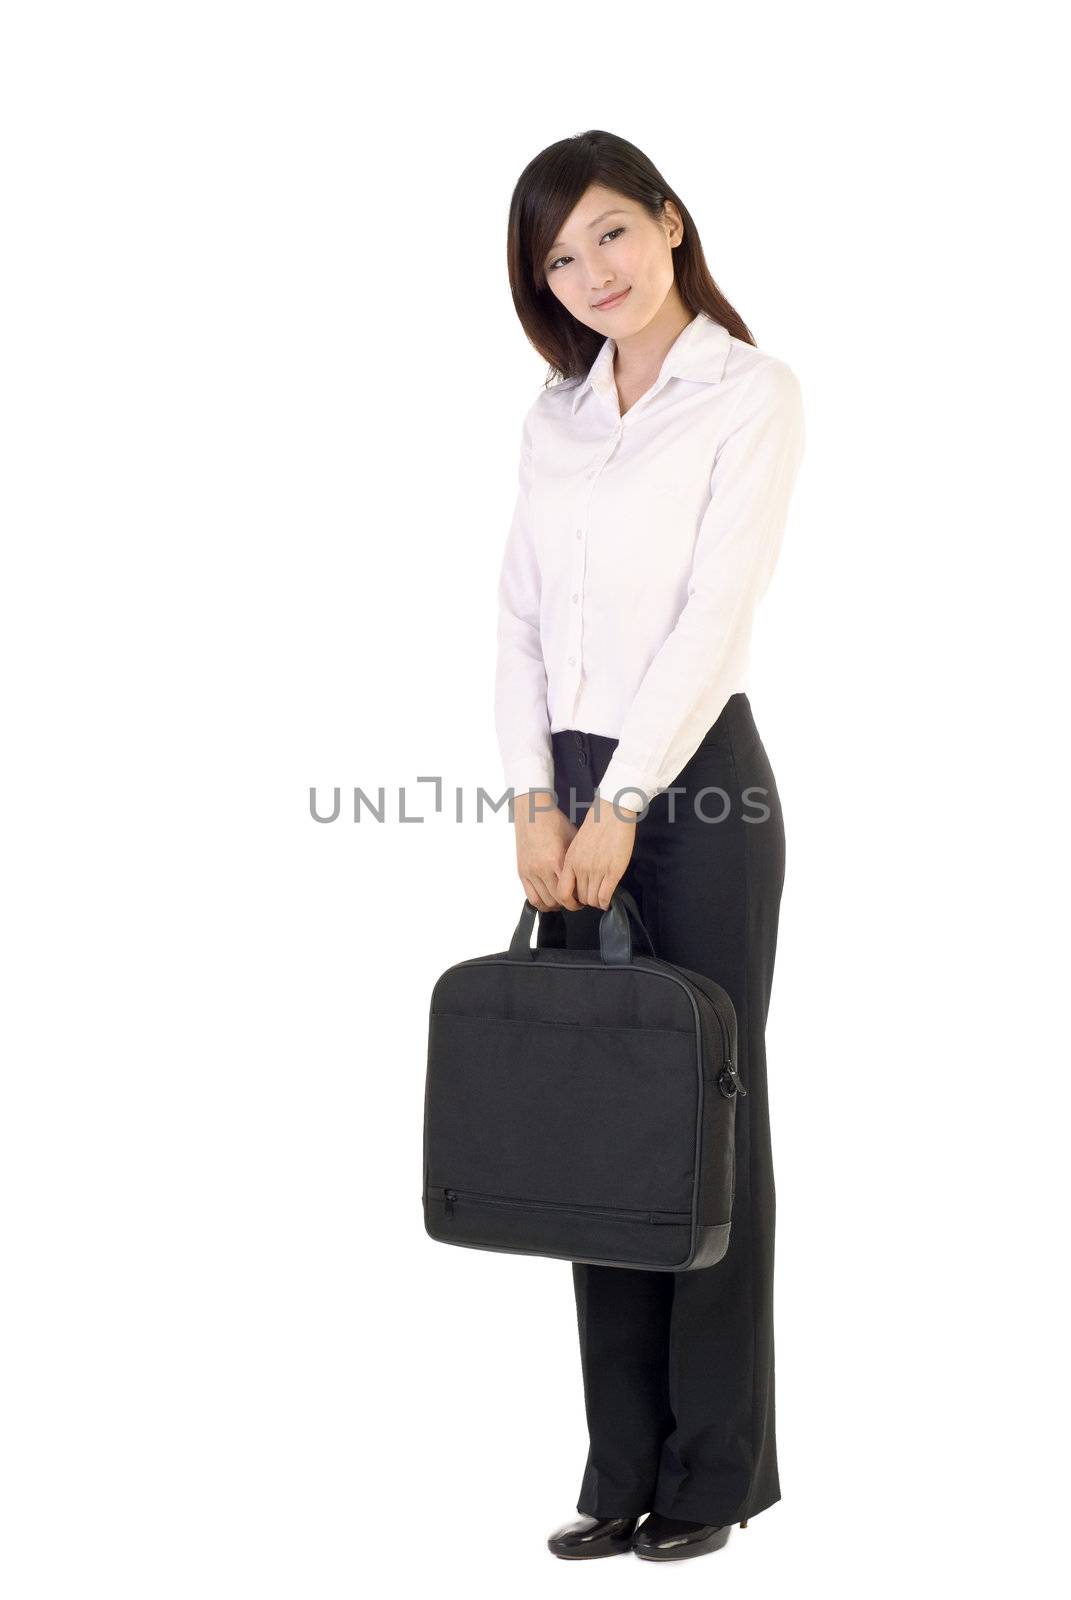 Business woman portrait of Asian with briefcase standing and smile on white background.